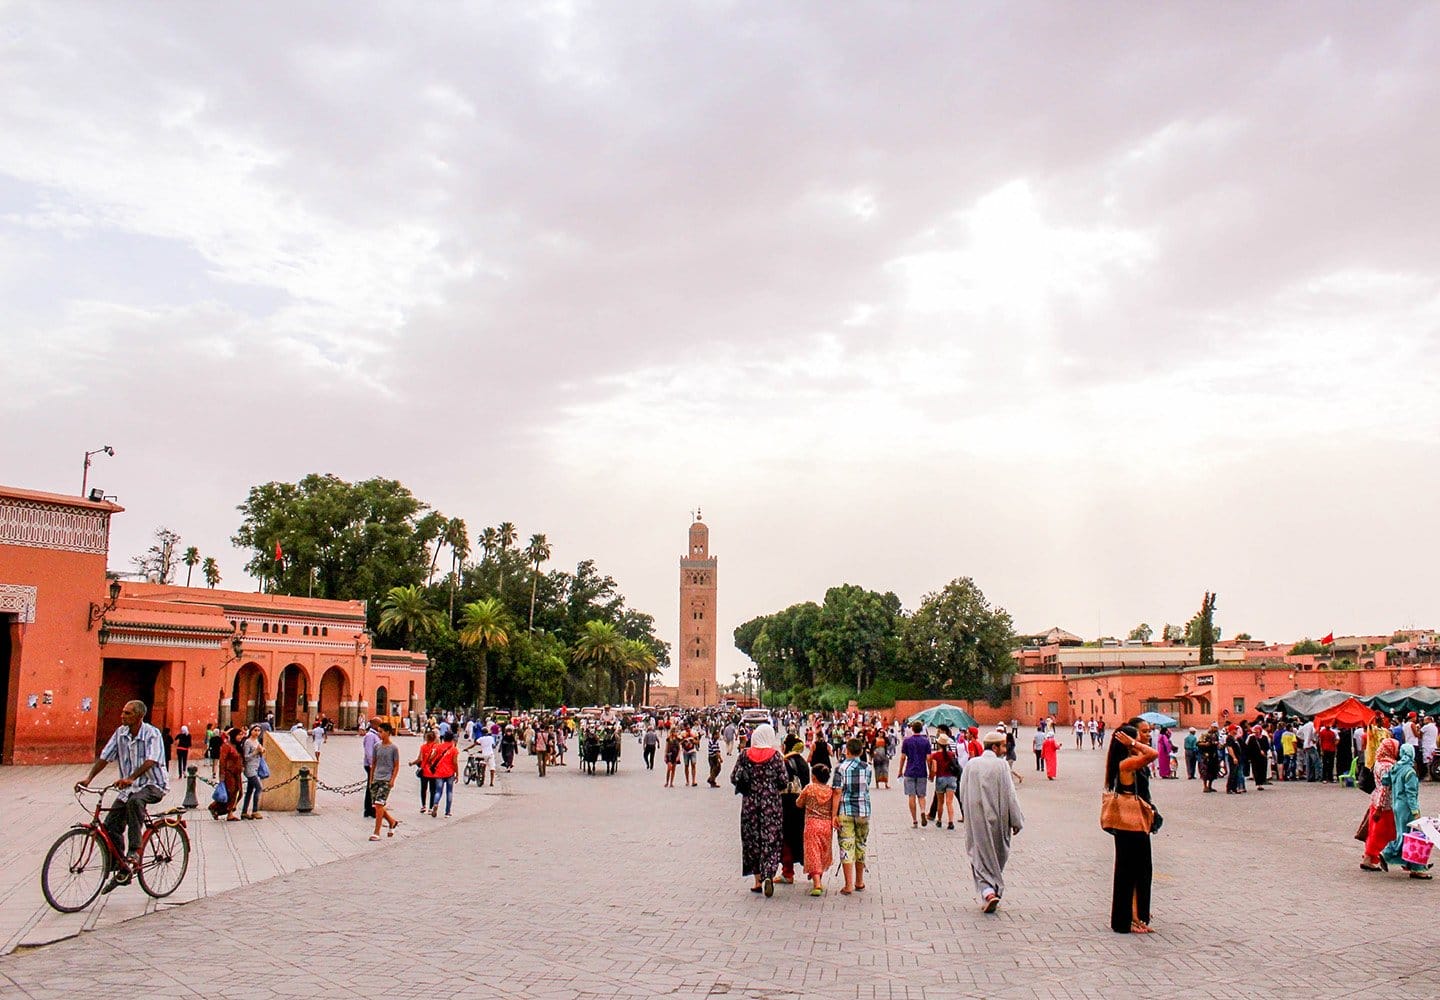 Jemaa el Fna in Marrakech on a cloudy day